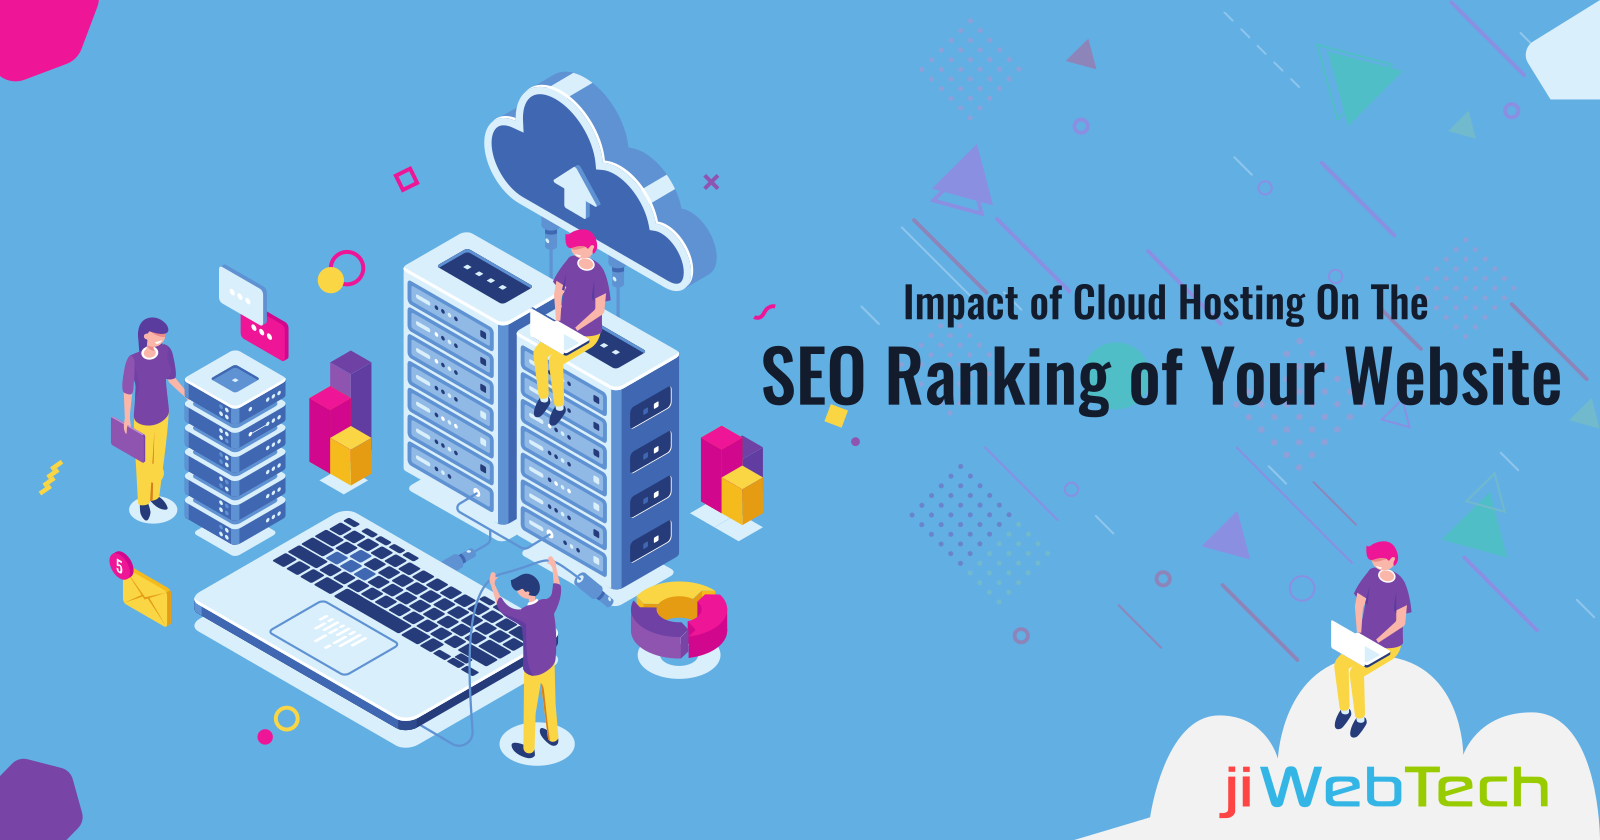 Impact of Cloud Hosting On The SEO Ranking of Your Website